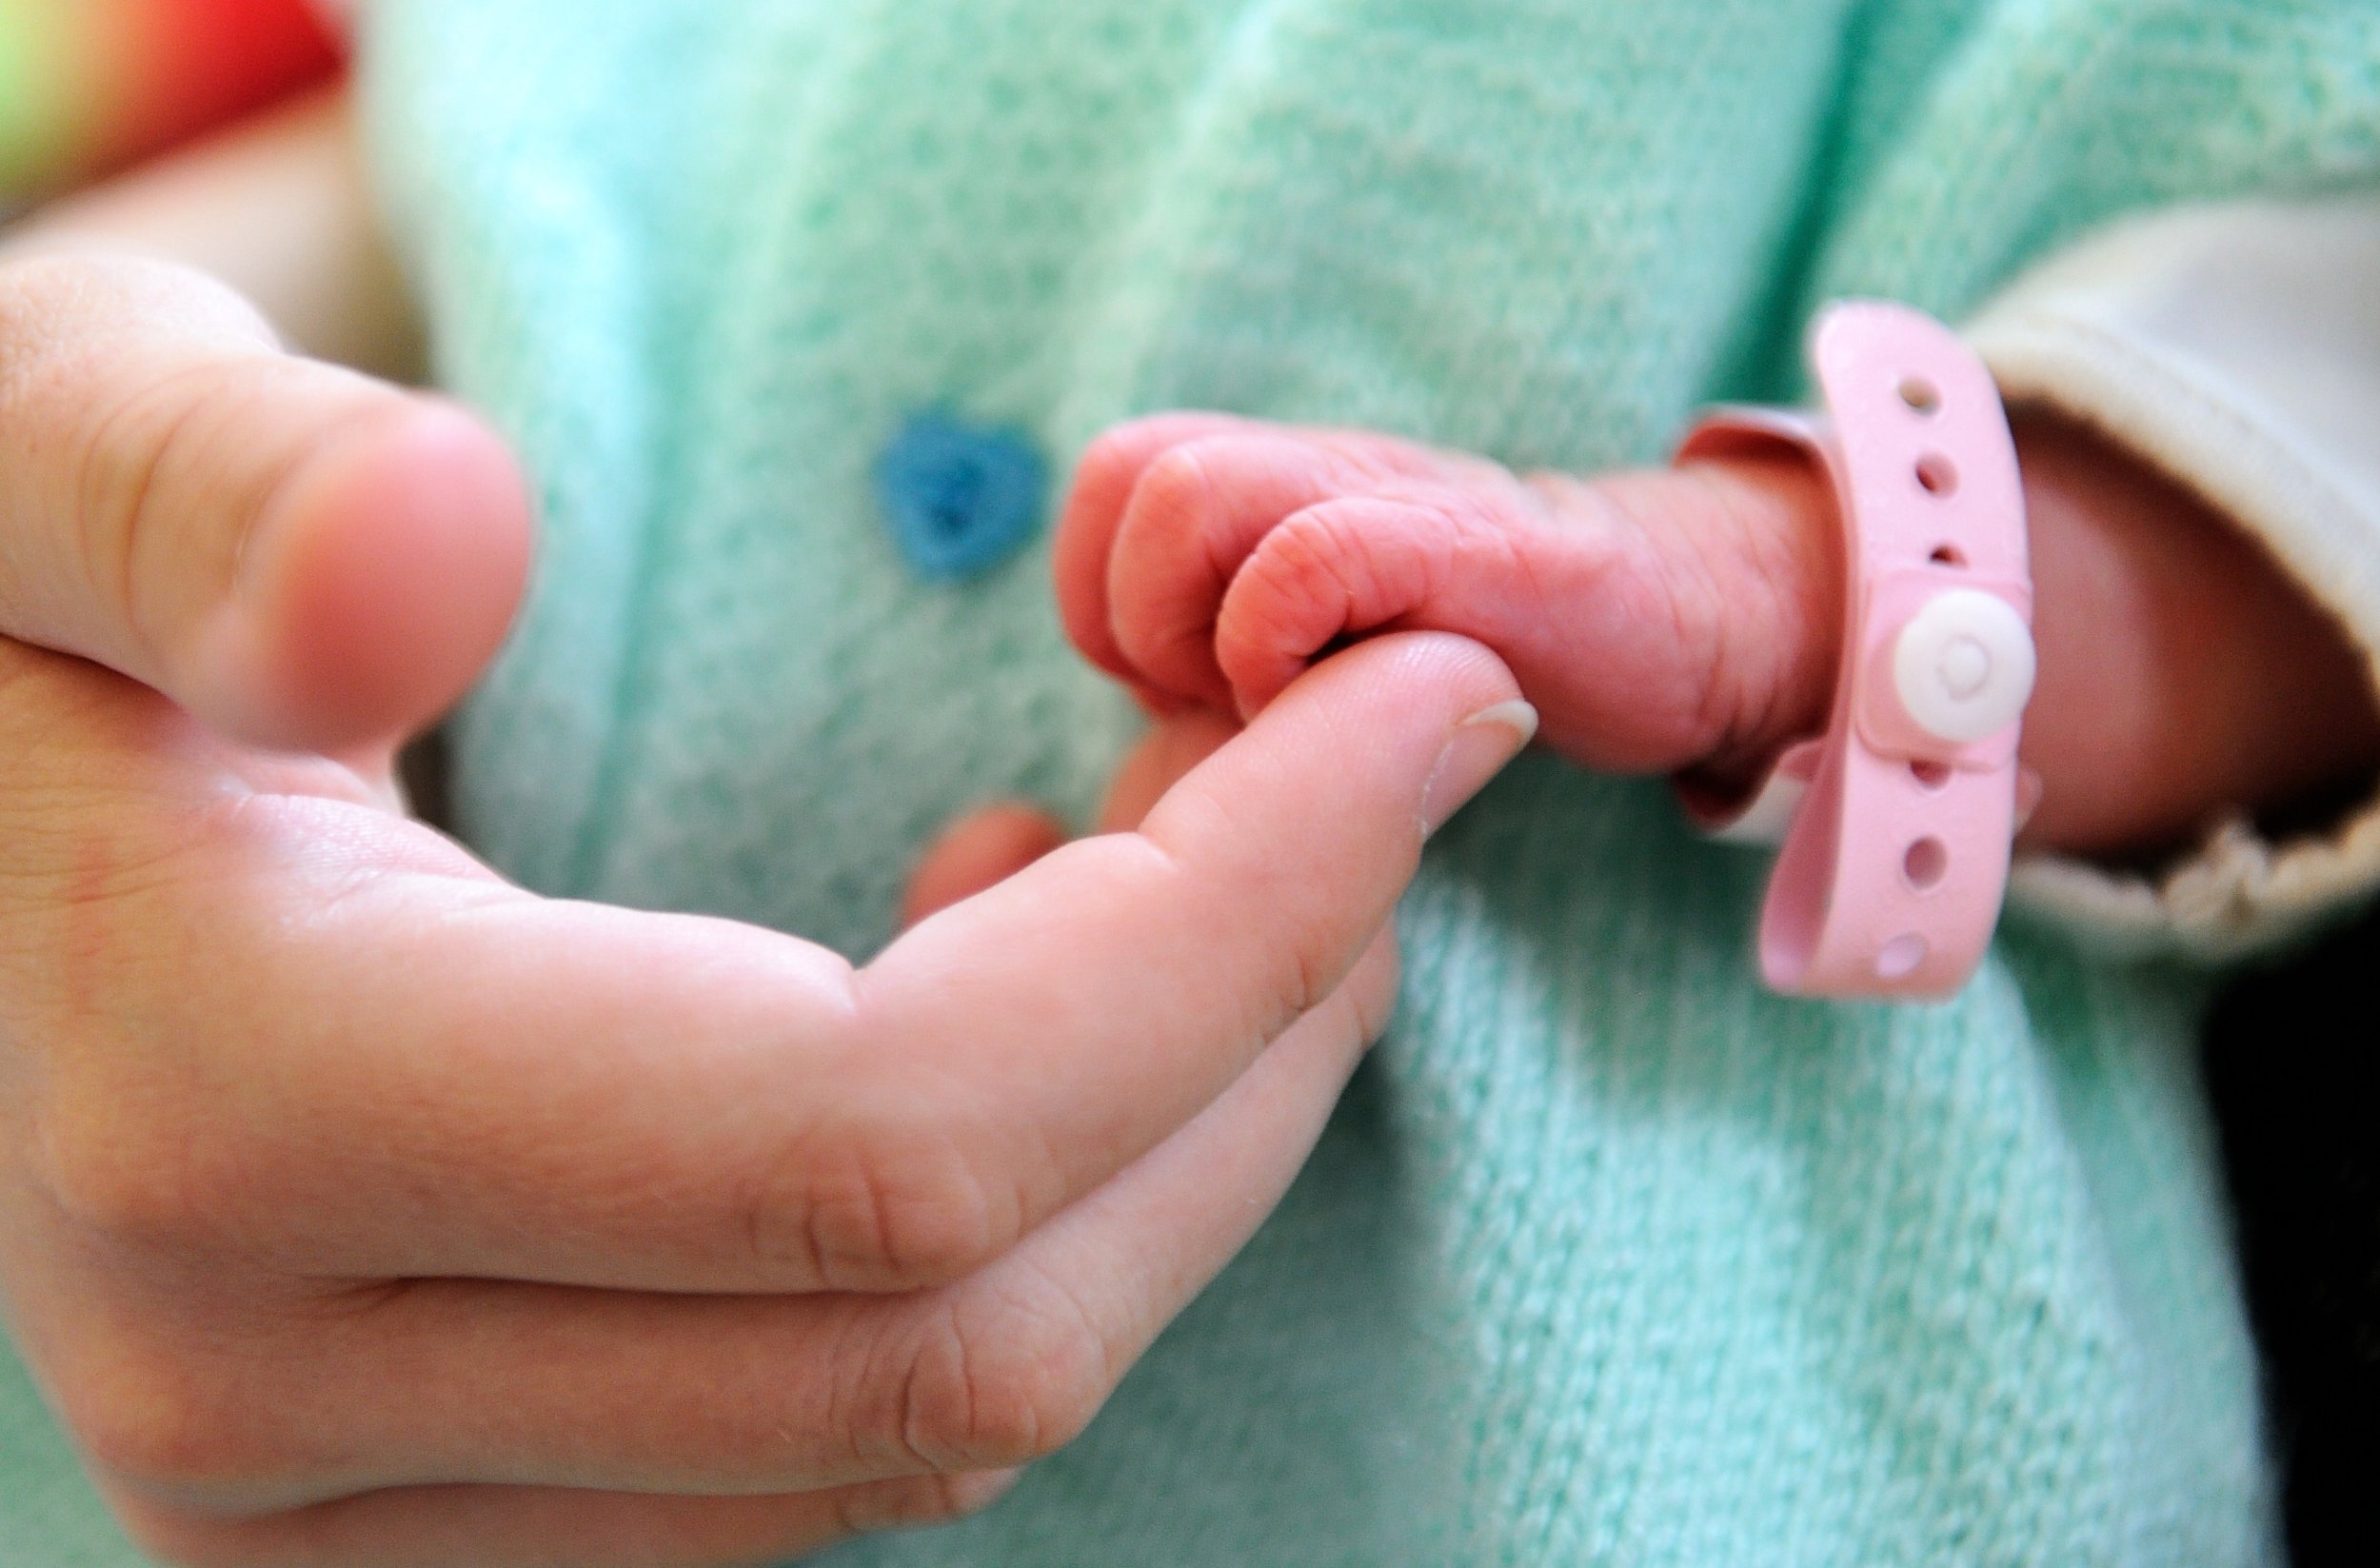 Russia To Ban Foreigners From Using Russian Surrogate Mothers, Considers It Child Trafficking